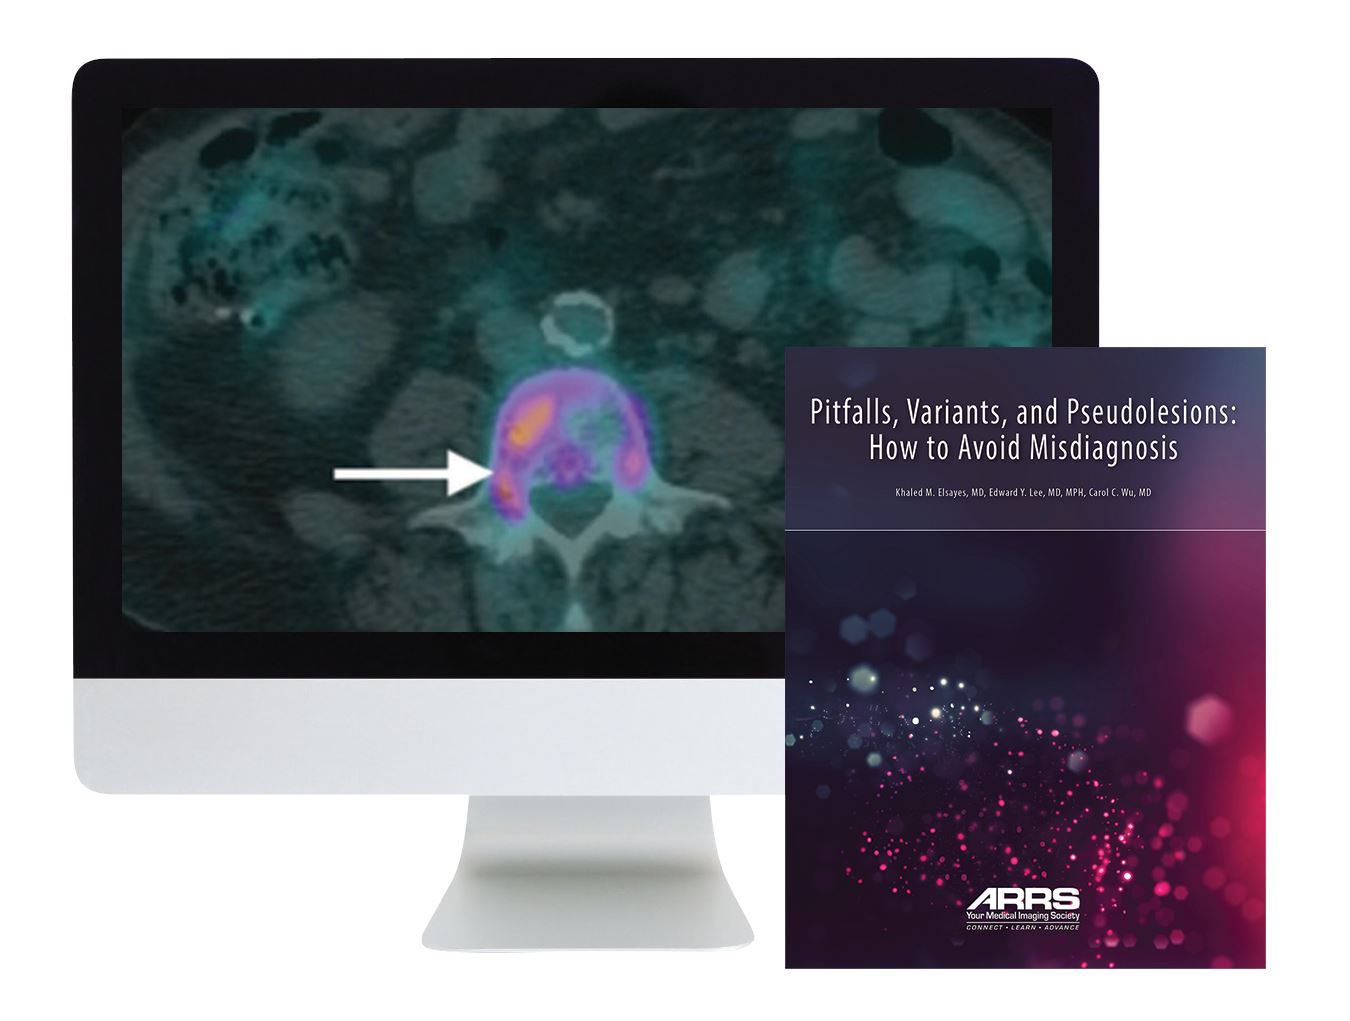 ARRS Pitfalls, Variants, and Pseudolesions: How to Avoid Misdiagnosis 2019 | Medical Video Courses.